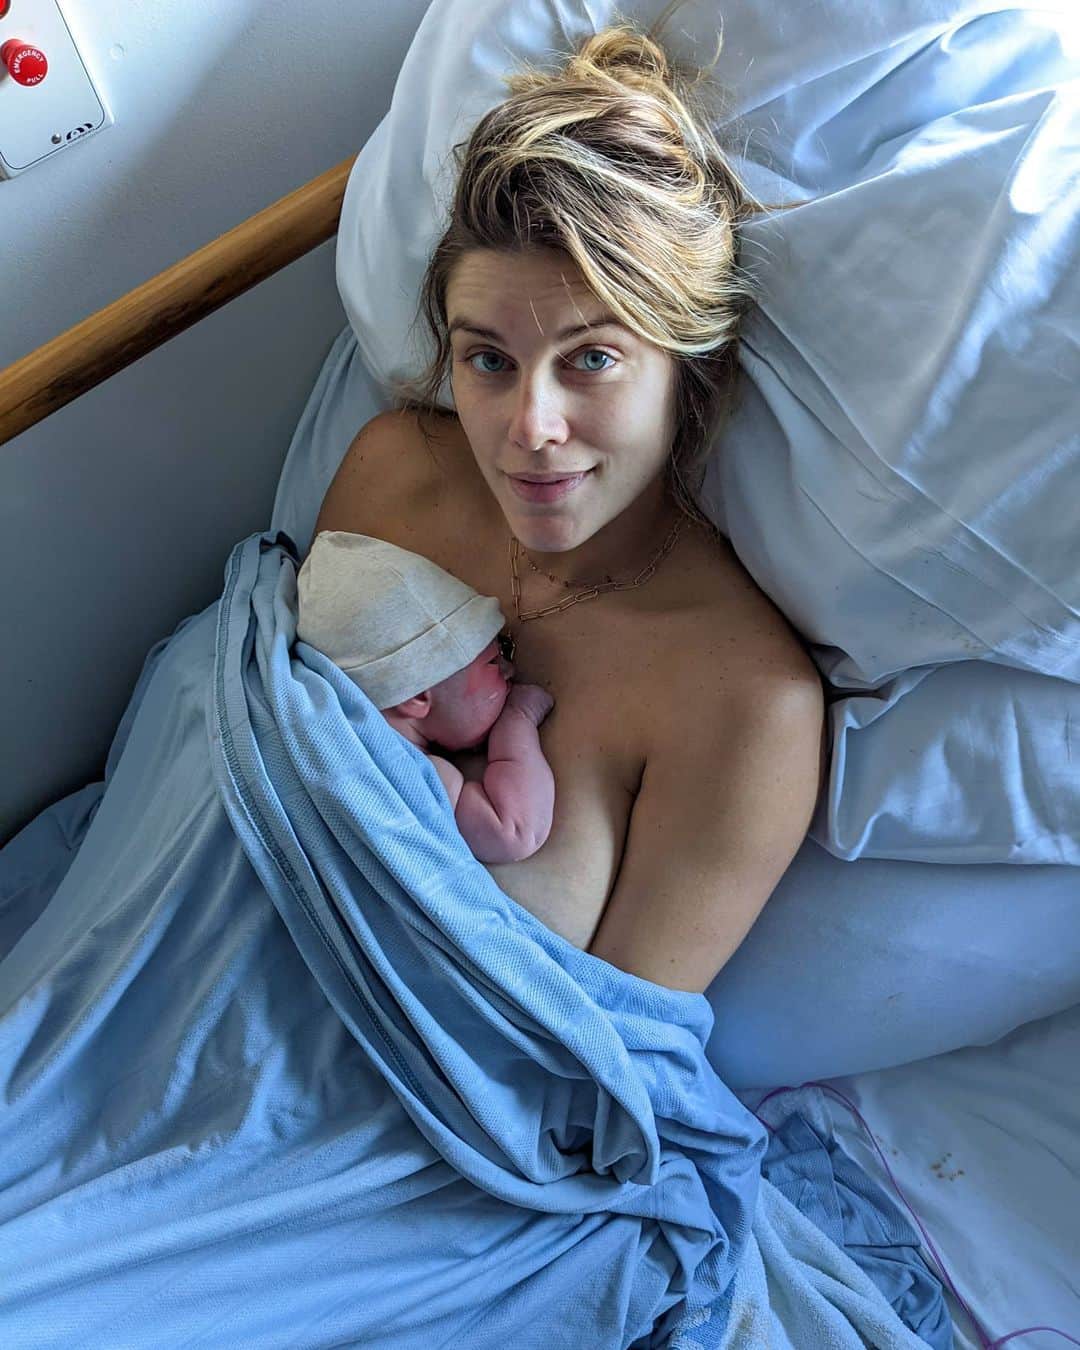 Ashley Jamesさんのインスタグラム写真 - (Ashley JamesInstagram)「4 weeks on planet earth. 🌍  This time 4 Saturday's ago we were just leaving hospital. About 6 hours earlier, at 1:52pm our little Alfie Rivers entered the world.   I've had a lot of questions about childbirth, and I honestly still don't know how to articulate the experience. I'd love to say it was the out-of-body, magical experience I was hoping for, but it was a little more complicated than that.   My contractions started at about 7pm on the 8th January. I wasn't sure initially if they even were contractions, it felt like period pains. But I was desperate to meet him, so I started timing the contractions and bounced on my birthing ball and then went to bed - not that I was able to sleep. Fast forward to 4am, we made our way to hospital and met my amazing midwives there having called them throughout the night. I did my covid test and we made our way to the birthing suite.  From that moment, time was a blur. I couldn't have told you how many hours or days past. I moved between the bed and the pool, I remember the reassuring words of the midwives, the chilled music I had playing, and Tommy holding my hands. The baby's shoulders needed to turn, which was a painful process on my pelvis (my pelvic girdle pain was excruciating at the end). I took pethadine, which although it only lasted a short time, allowed me to sleep for a bit.  My instinct told me when the time was right to push. I loved this part of the experience. I remember feeling so in tune with my body. Focussing on the gas & air and TENS machine, and listening to the reassurances from the midwives and Tommy. I'll never forget the relief of feeling Alfie in my arms, hearing him breathe, and just knowing he was here and healthy... But also the exhaustion. This photo was from the moment he was passed to me.   Whilst I found childbirth an experience you cannot control, I felt empowered knowing my options and the language from doing hypnobirthing with @themindfulbirthgroup and antenatal classes with @thehappybirthclub.   I can't imagine life without Alfie now. My love grows for him every single day. I love the night cuddles the most. ❤️   I can talk more about childbirth & pregnancy in lockdown another time?」2月7日 5時38分 - ashleylouisejames